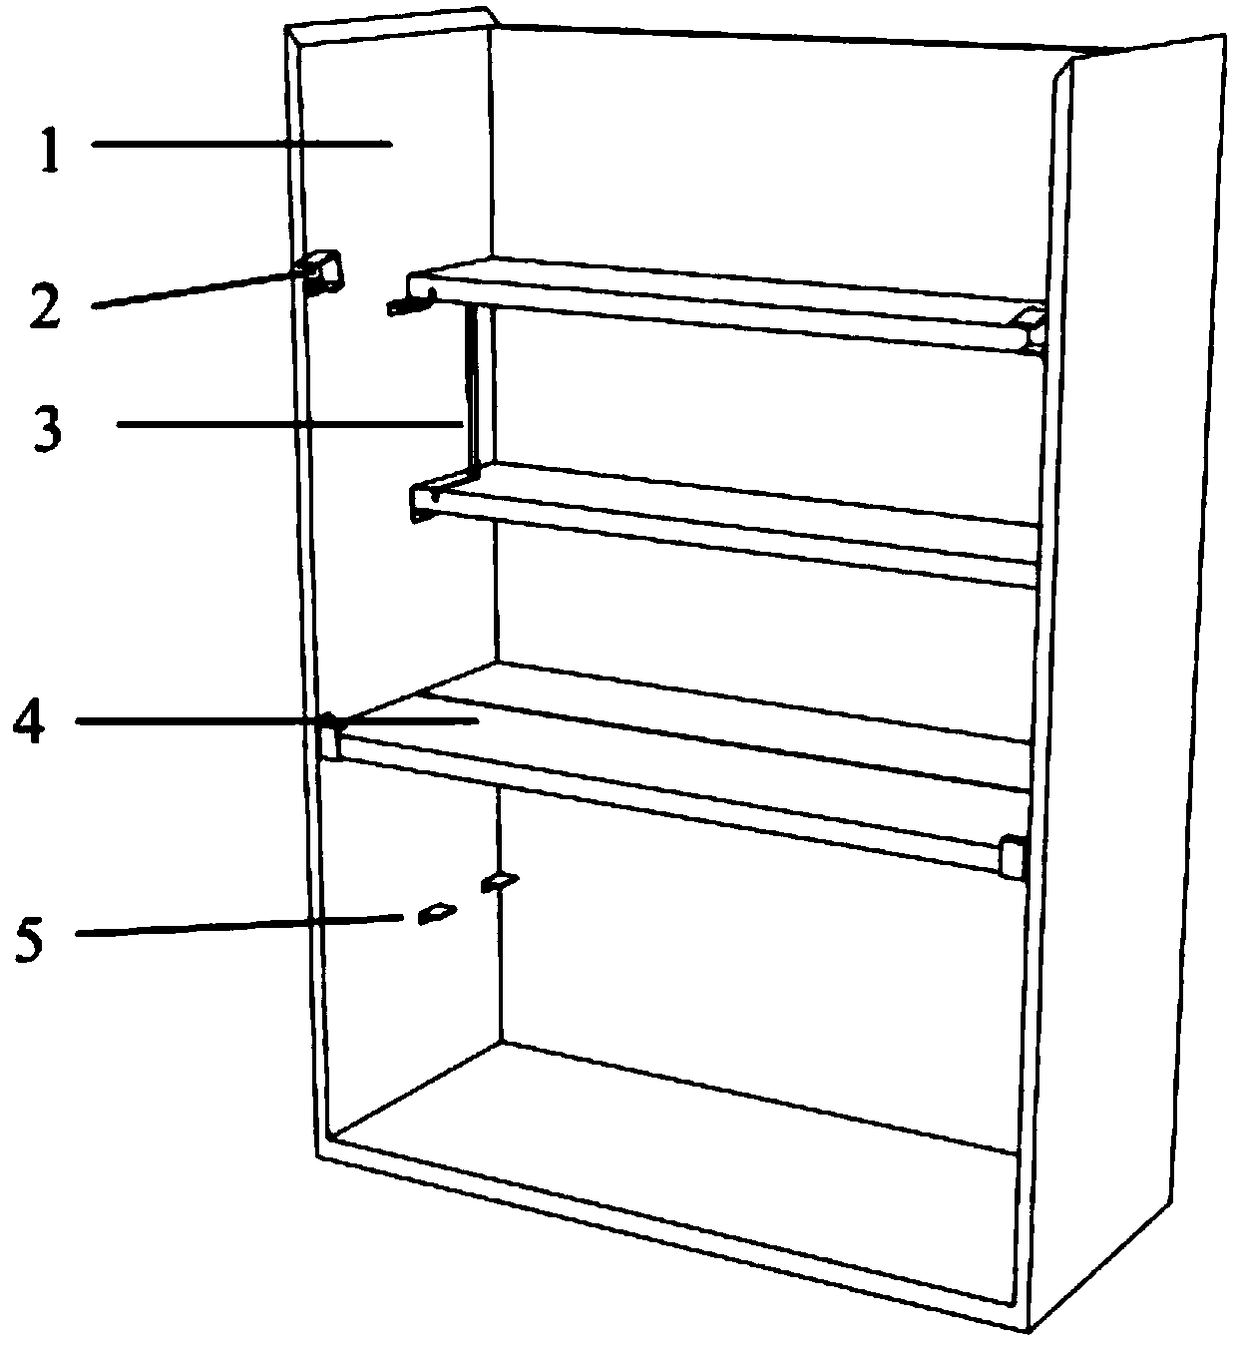 A bookcase with variable compartments